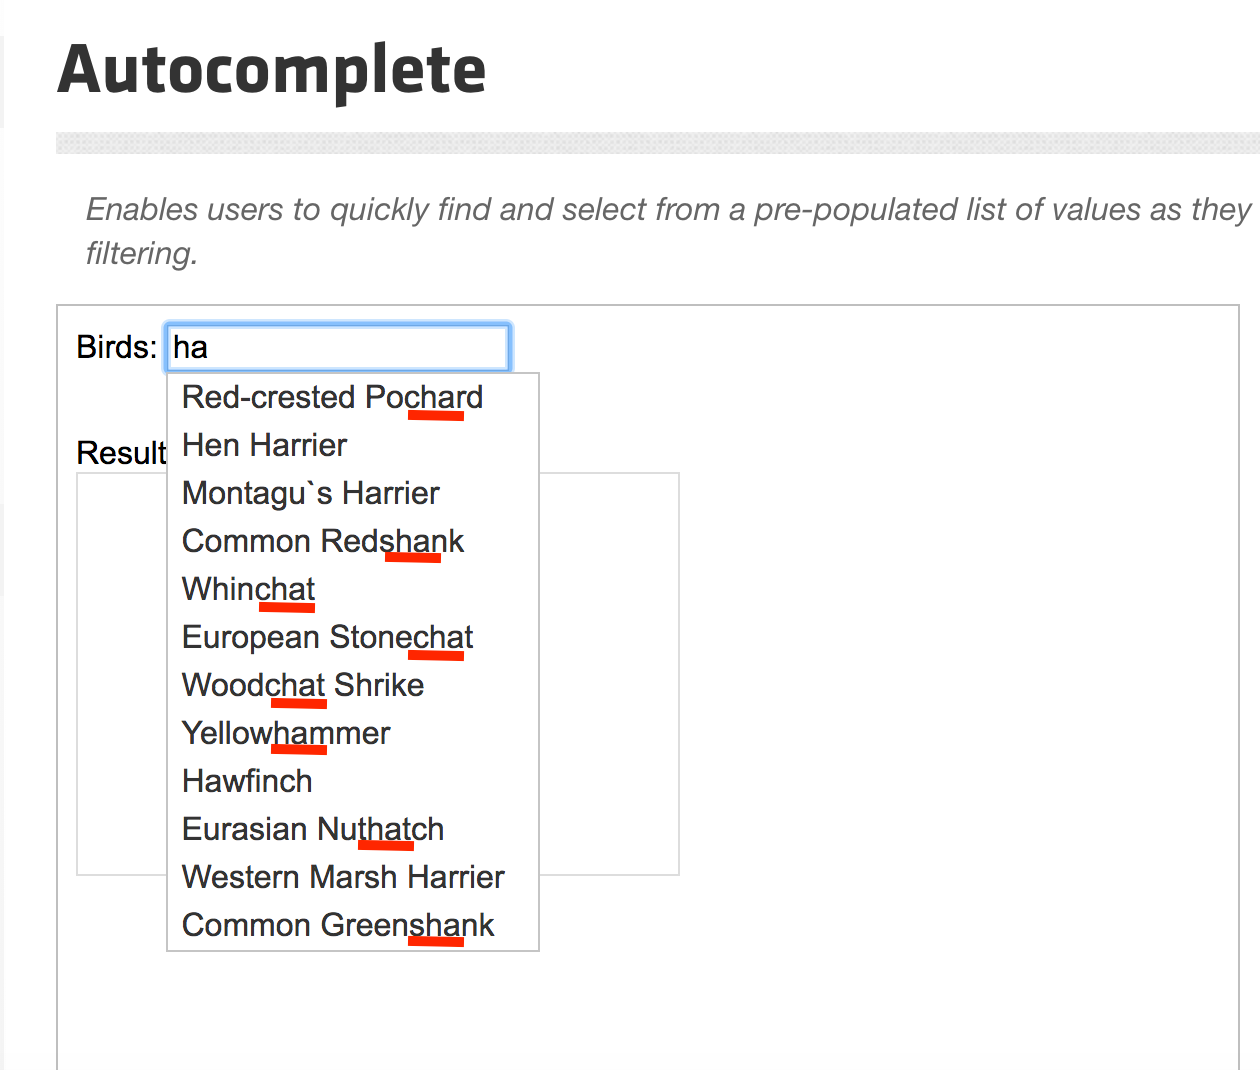 Build ultra-speed autocomplete with Go and jQuery [Part 2]